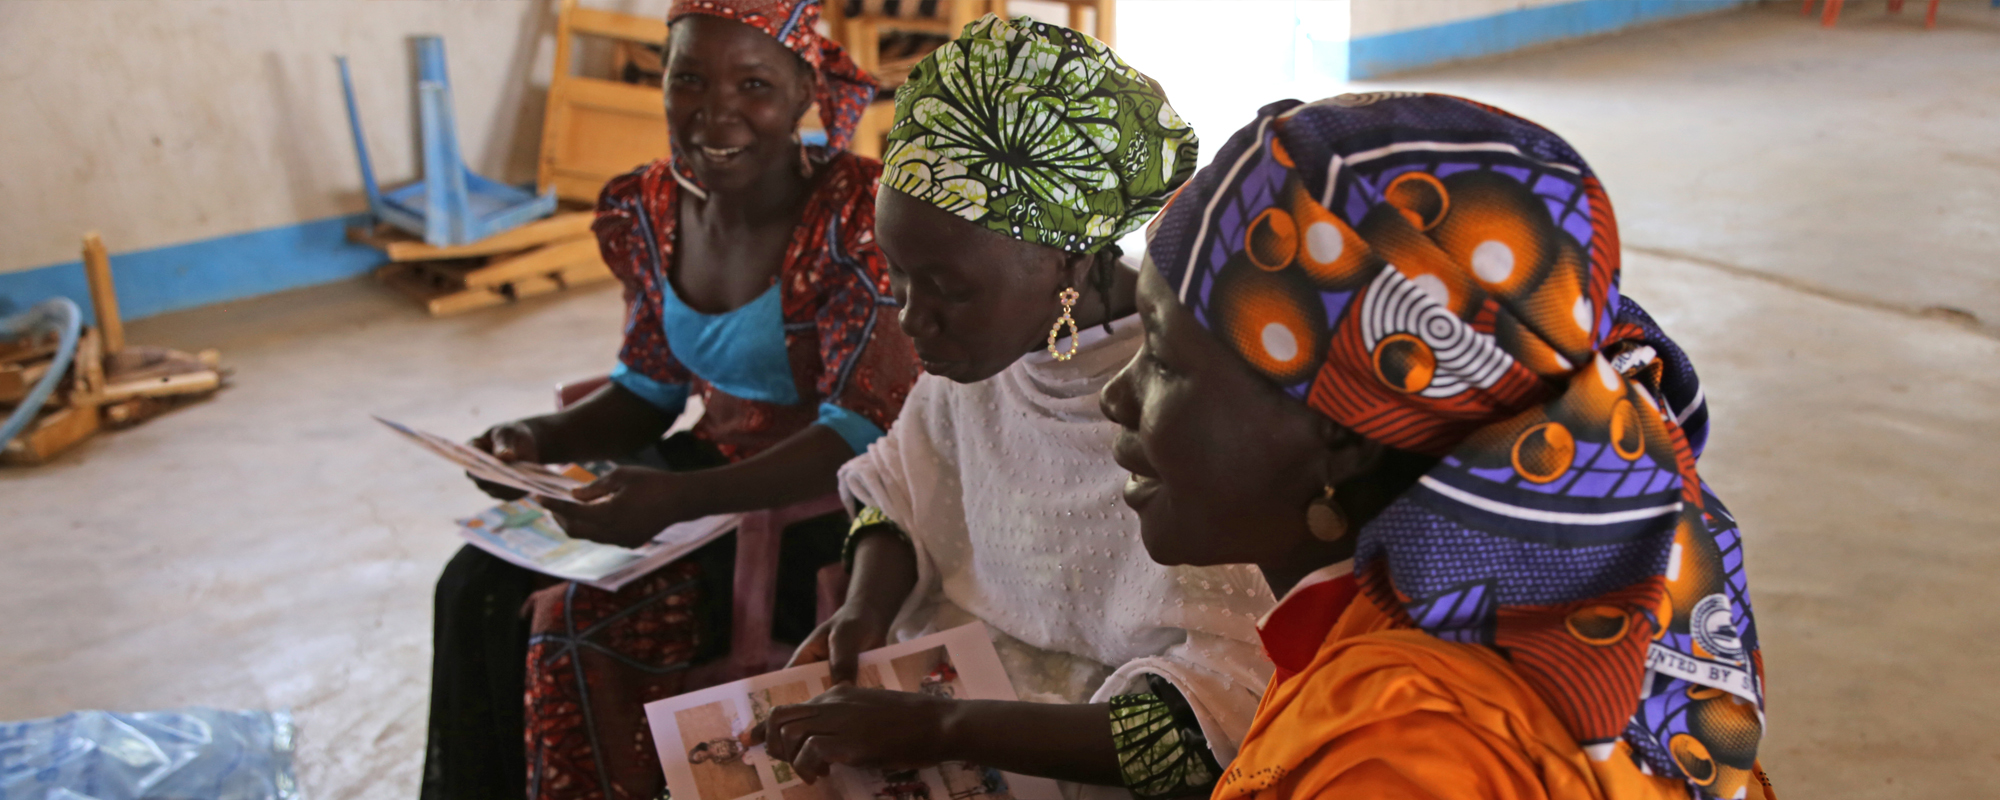 Three women in Cameroon sitting and looking at paperwork featuring their stories as part of ethical storytelling work